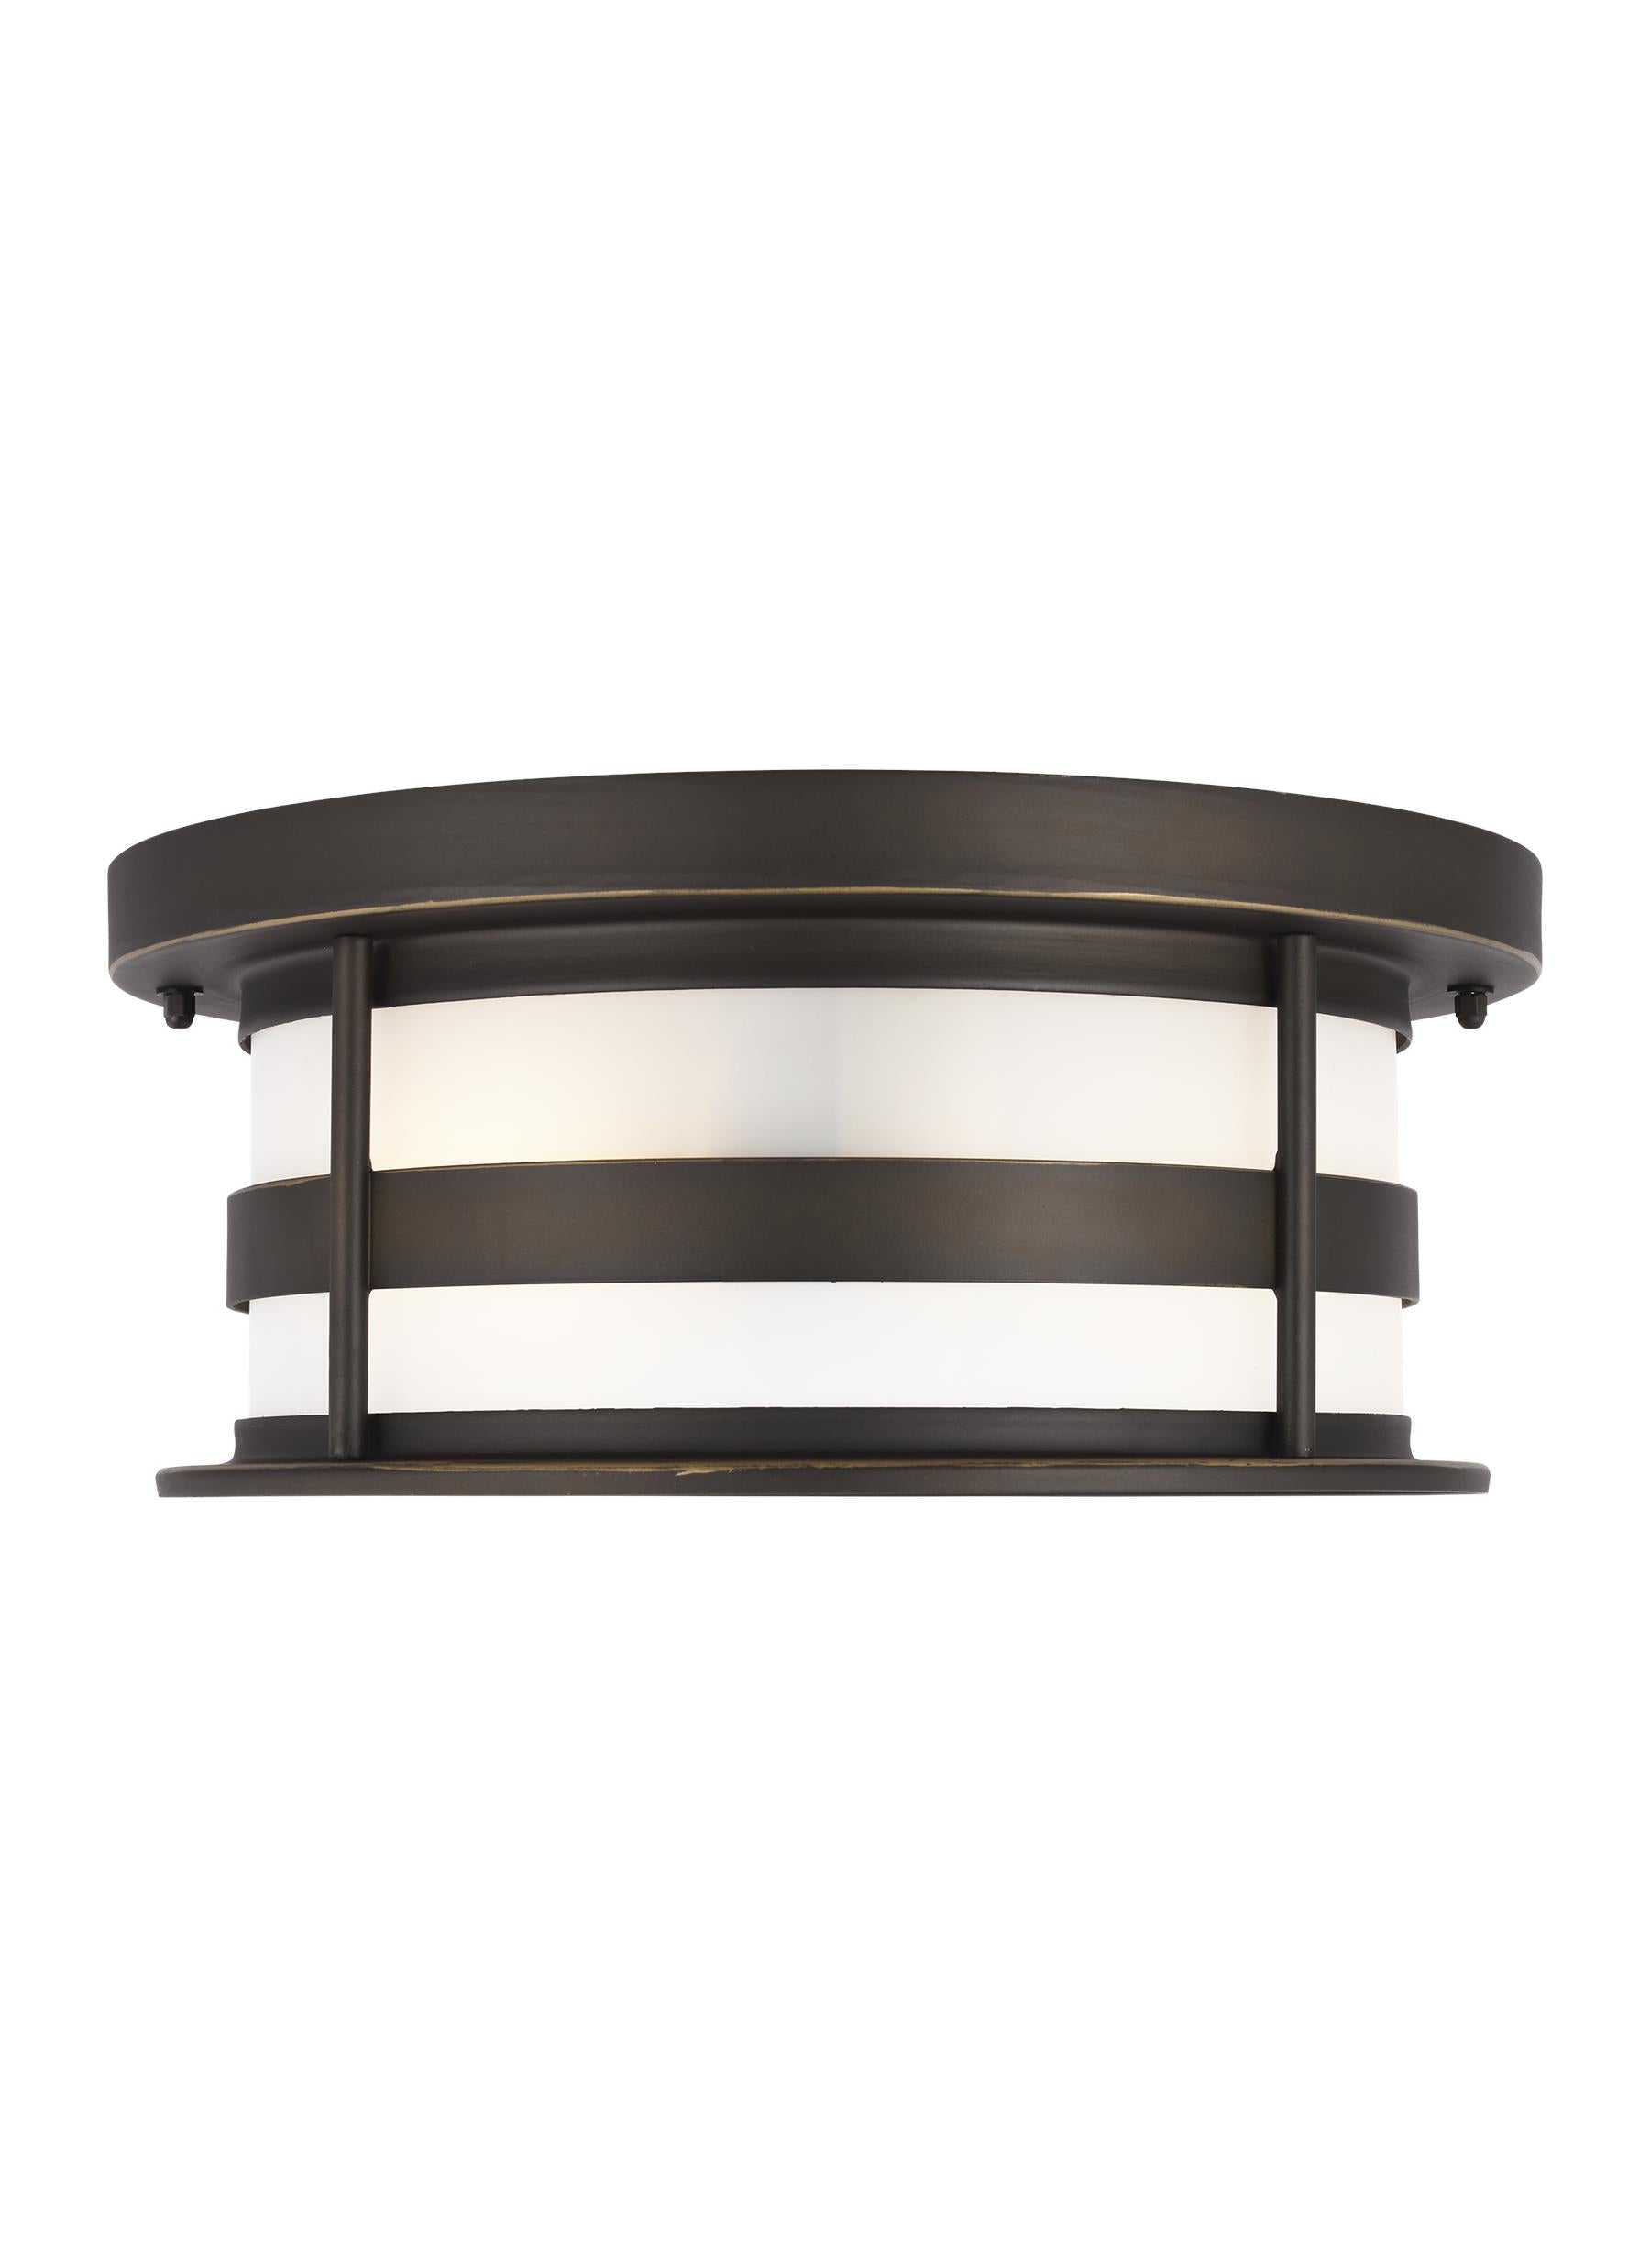 Wilburn modern 2-light outdoor exterior ceiling flush mount in antique bronze finish with satin etched glass shade